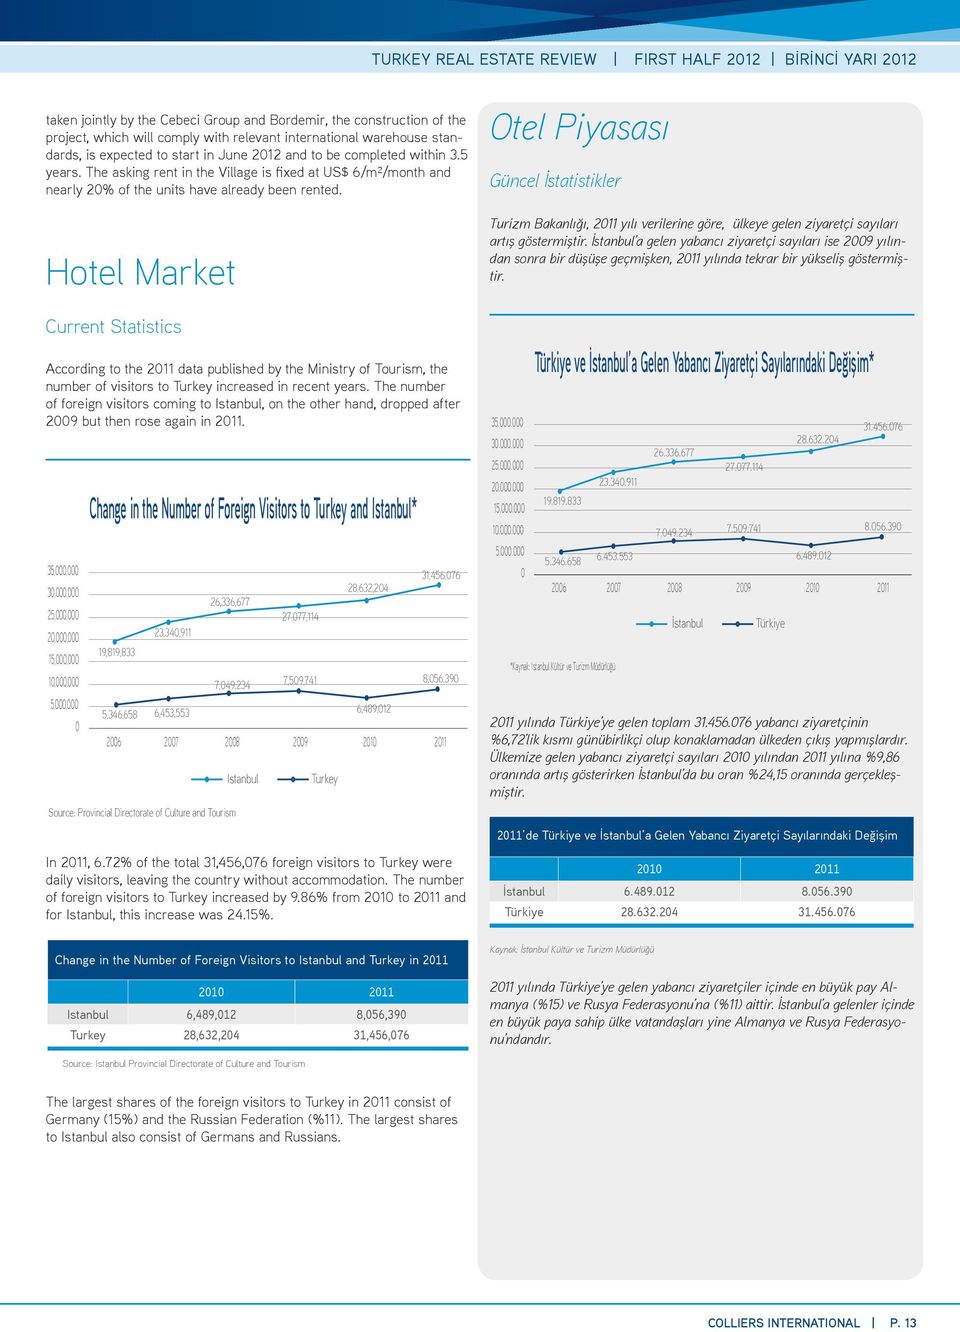 Hotel Market Current Statistics According to the 211 data published by the Ministry of Tourism, the number of visitors to Turkey increased in recent years.